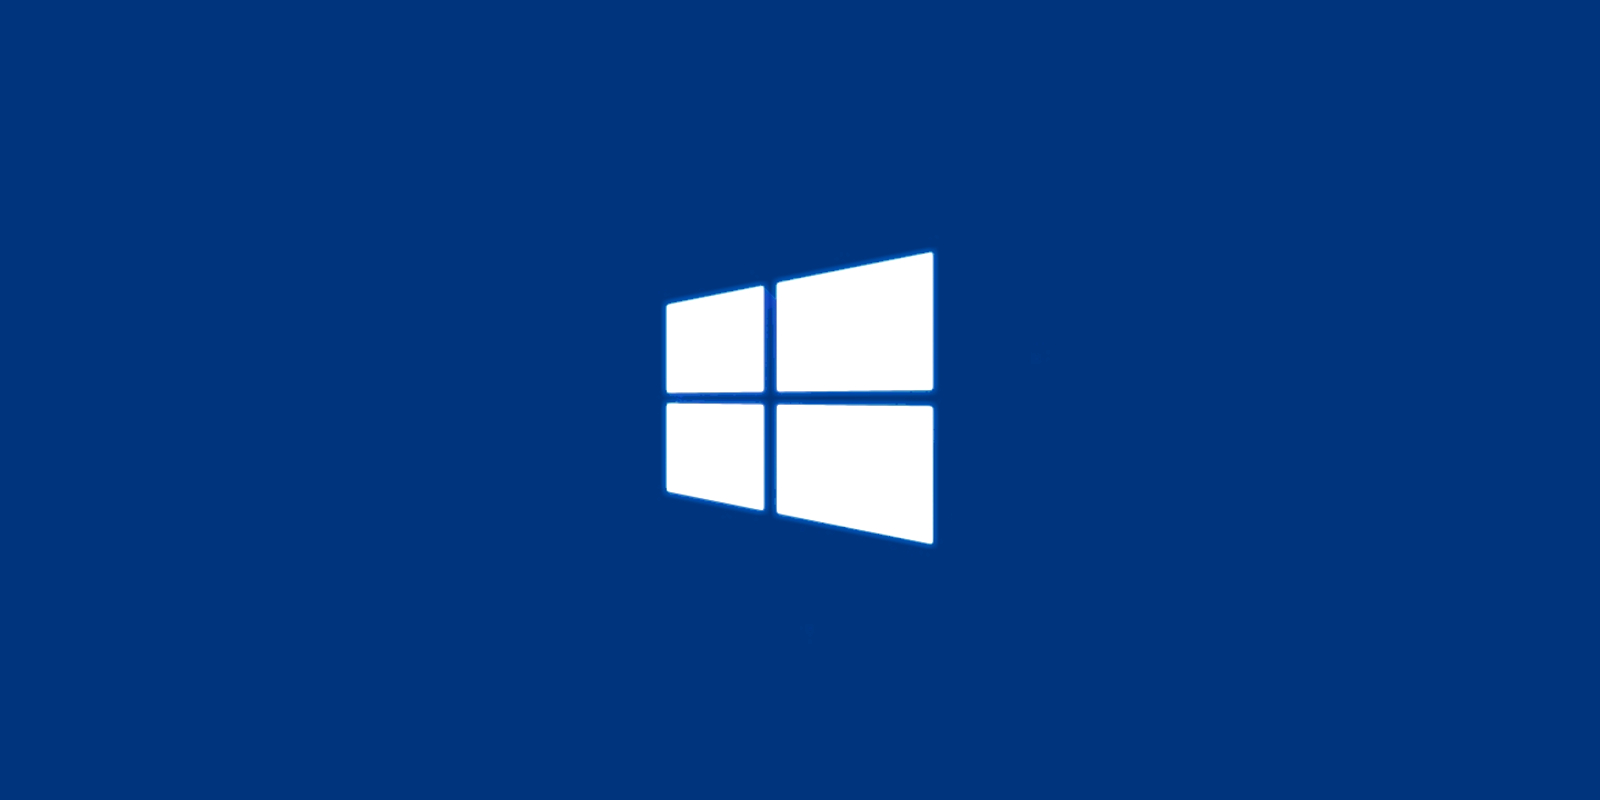 Windows server gets temporary mitigation for recent printing issues